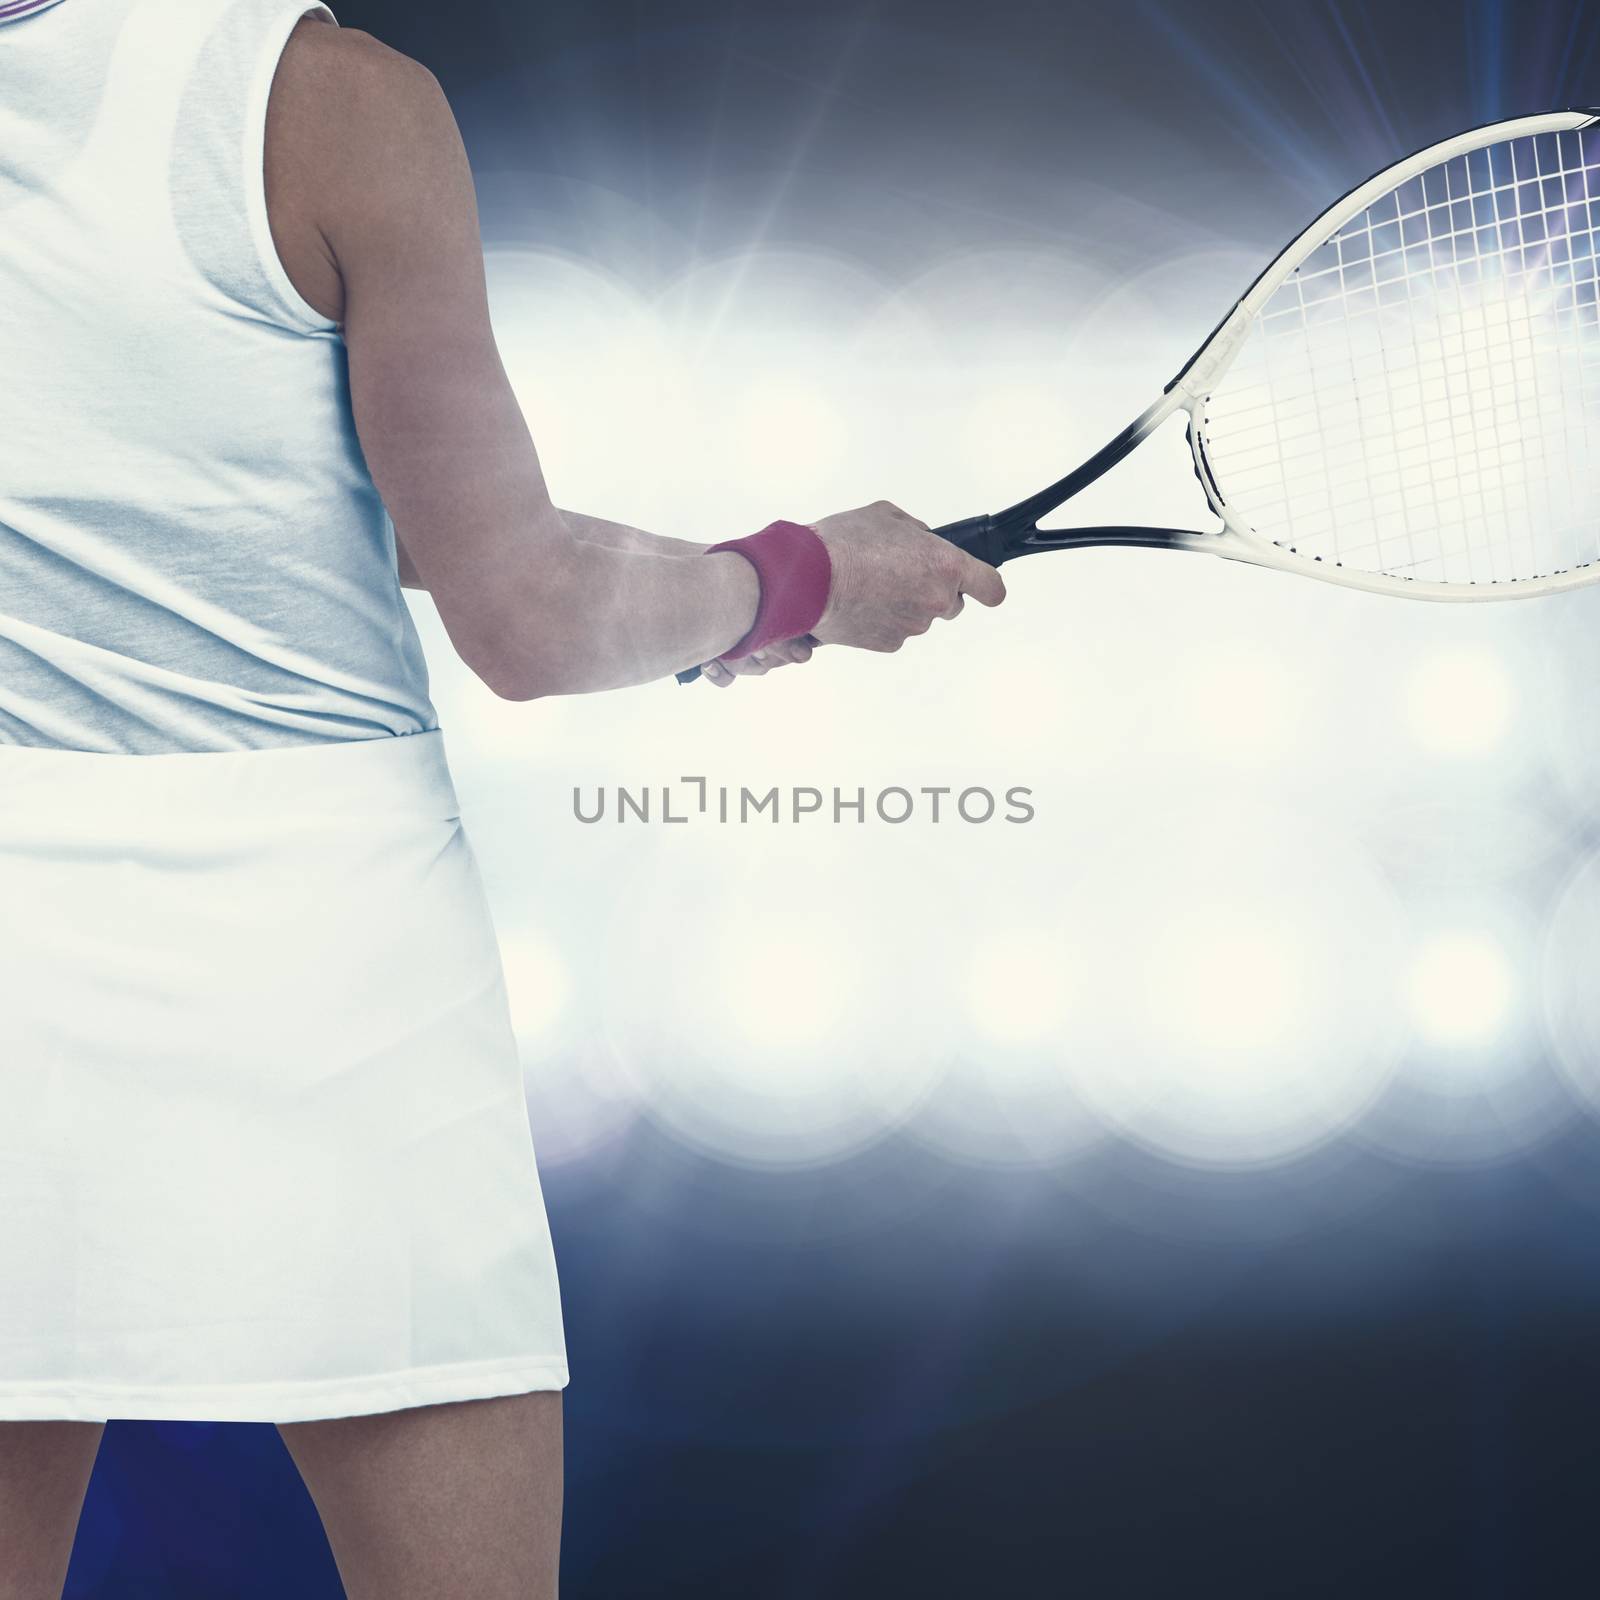 Athlete playing tennis with a racket  against spotlights